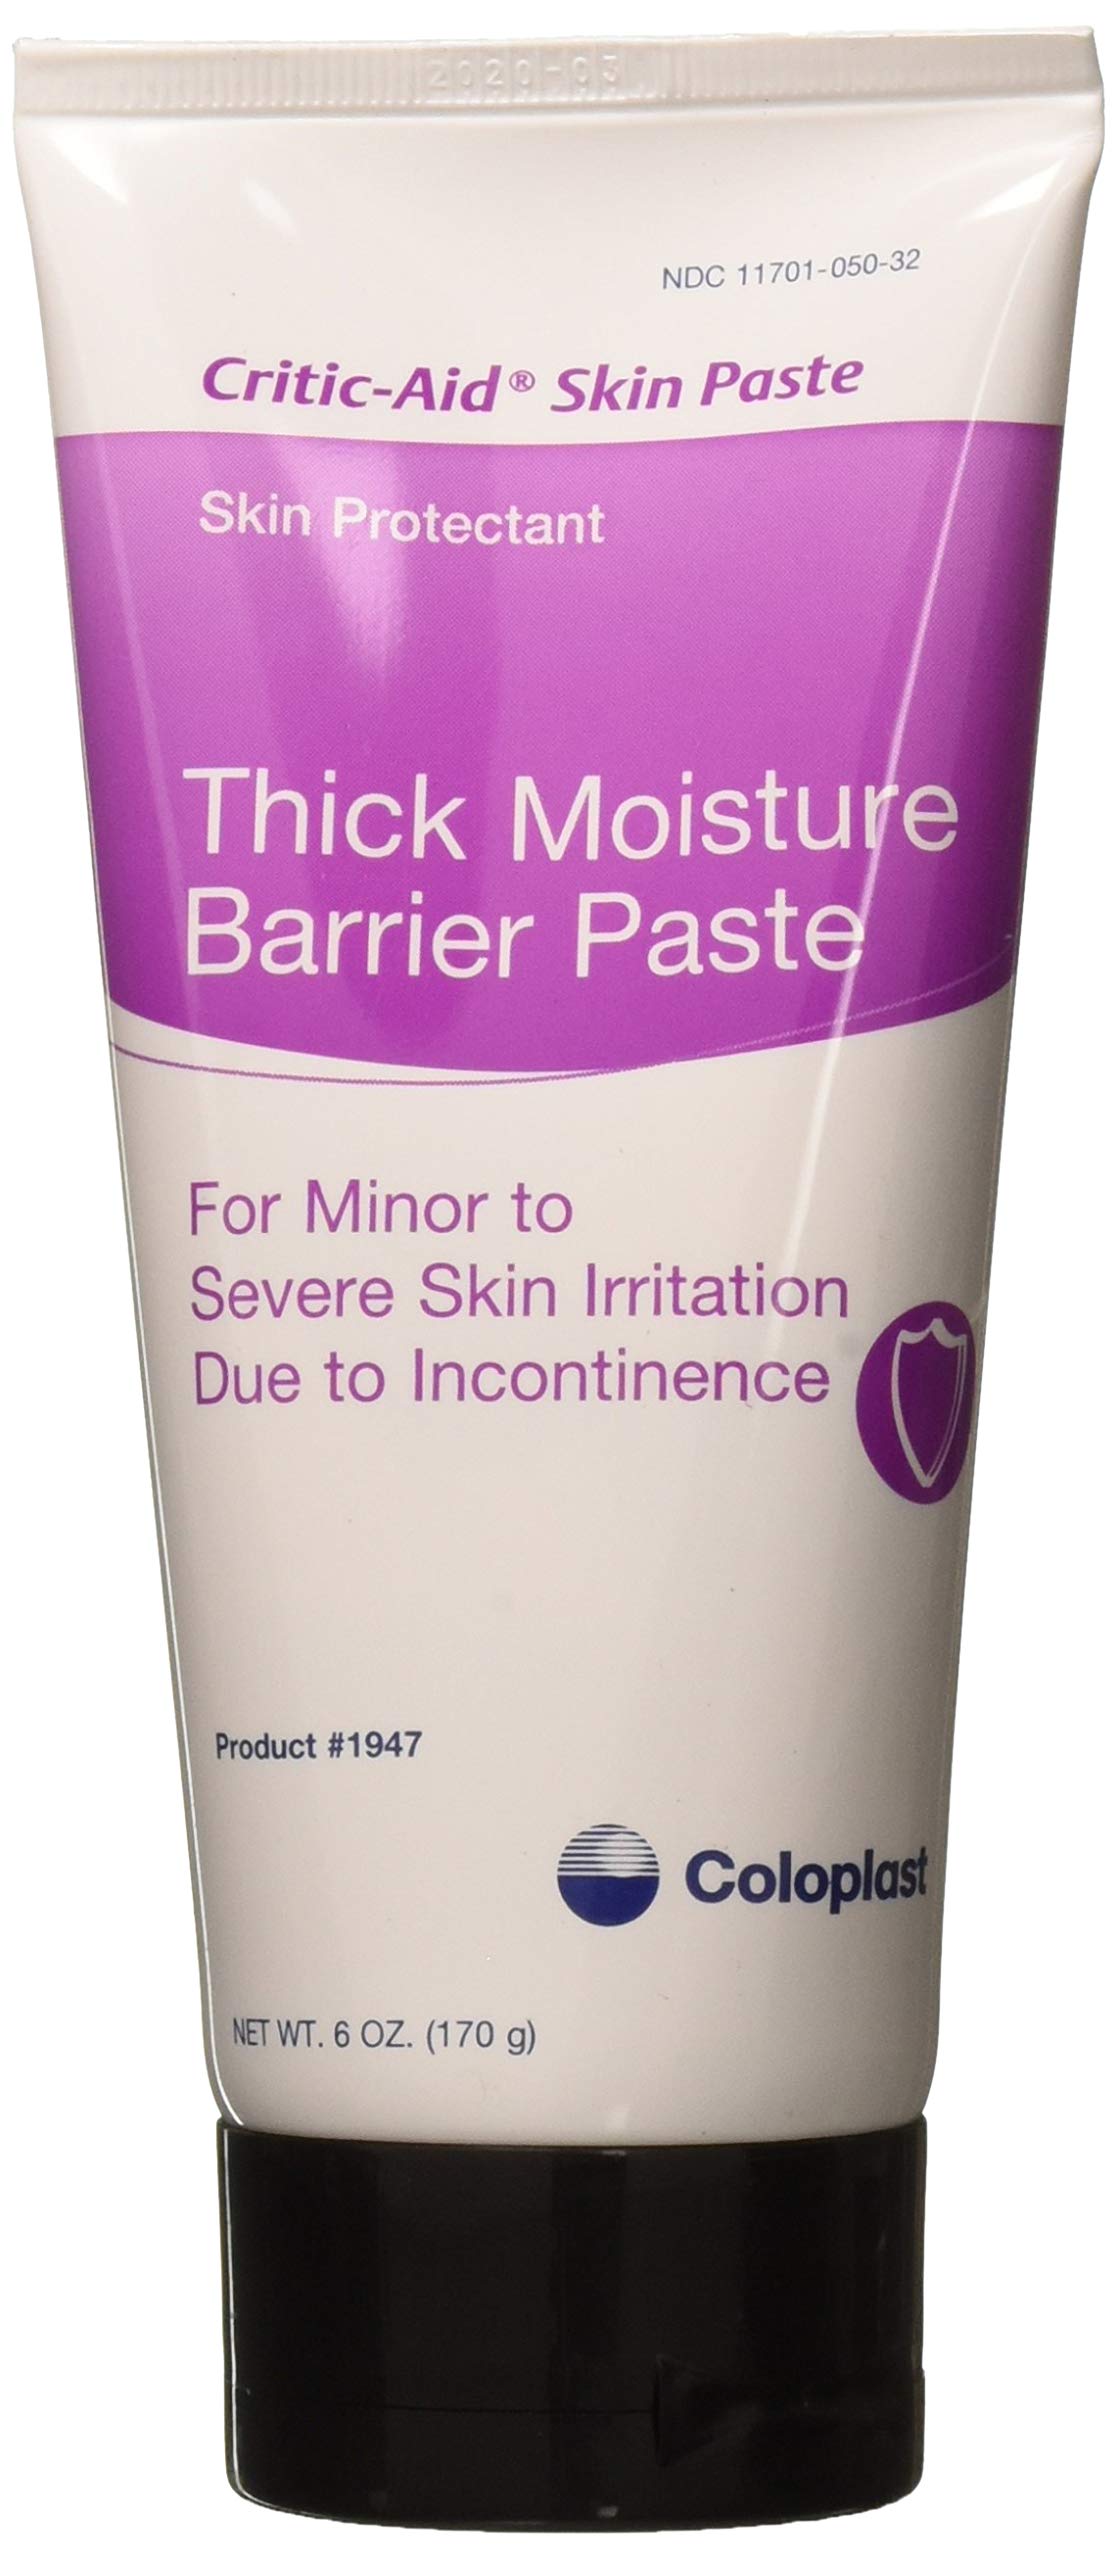 Coloplast Critic-Aid Skin Paste Skin Protectant Thick Moisture Barrier Paste, 6 Ounce (Each) Item 1947